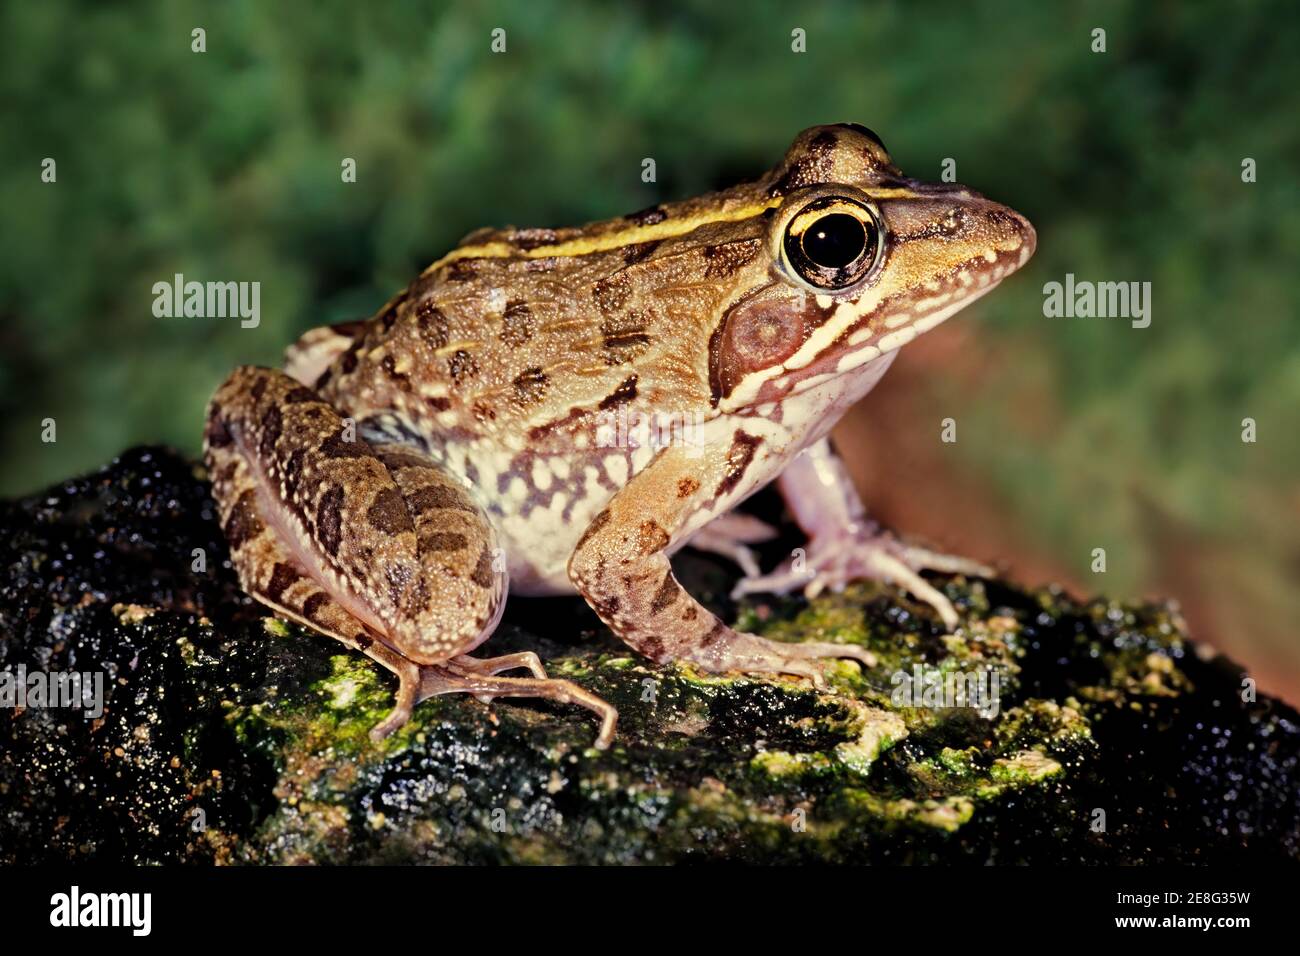 A common river frog (Amietia angolensis) in natural habitat, South Africa Stock Photo